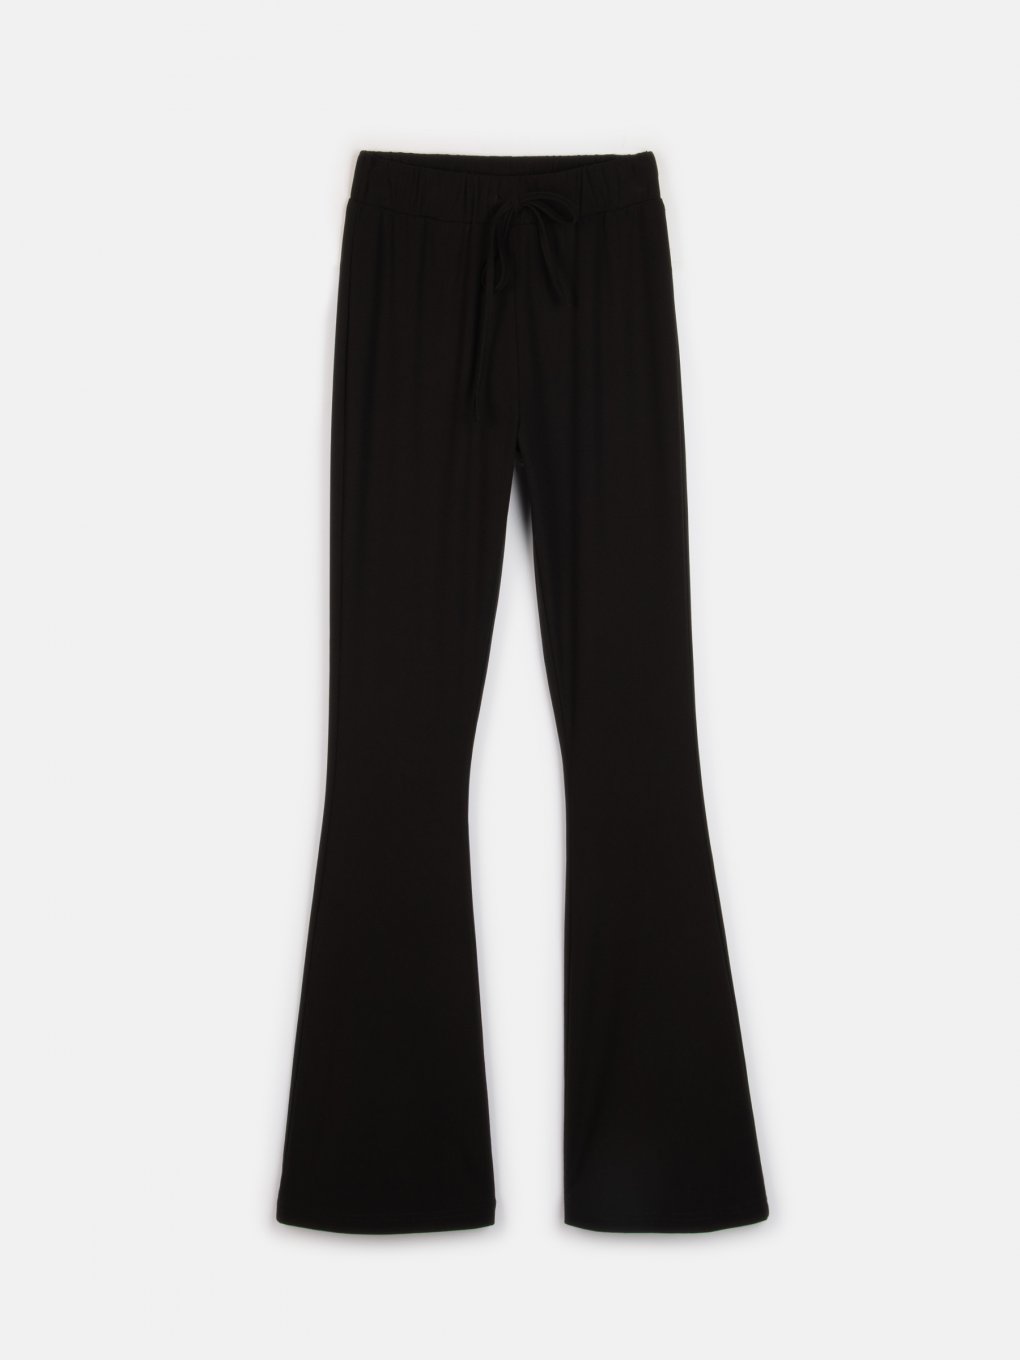 Flared ribbed pants with elastic waistband